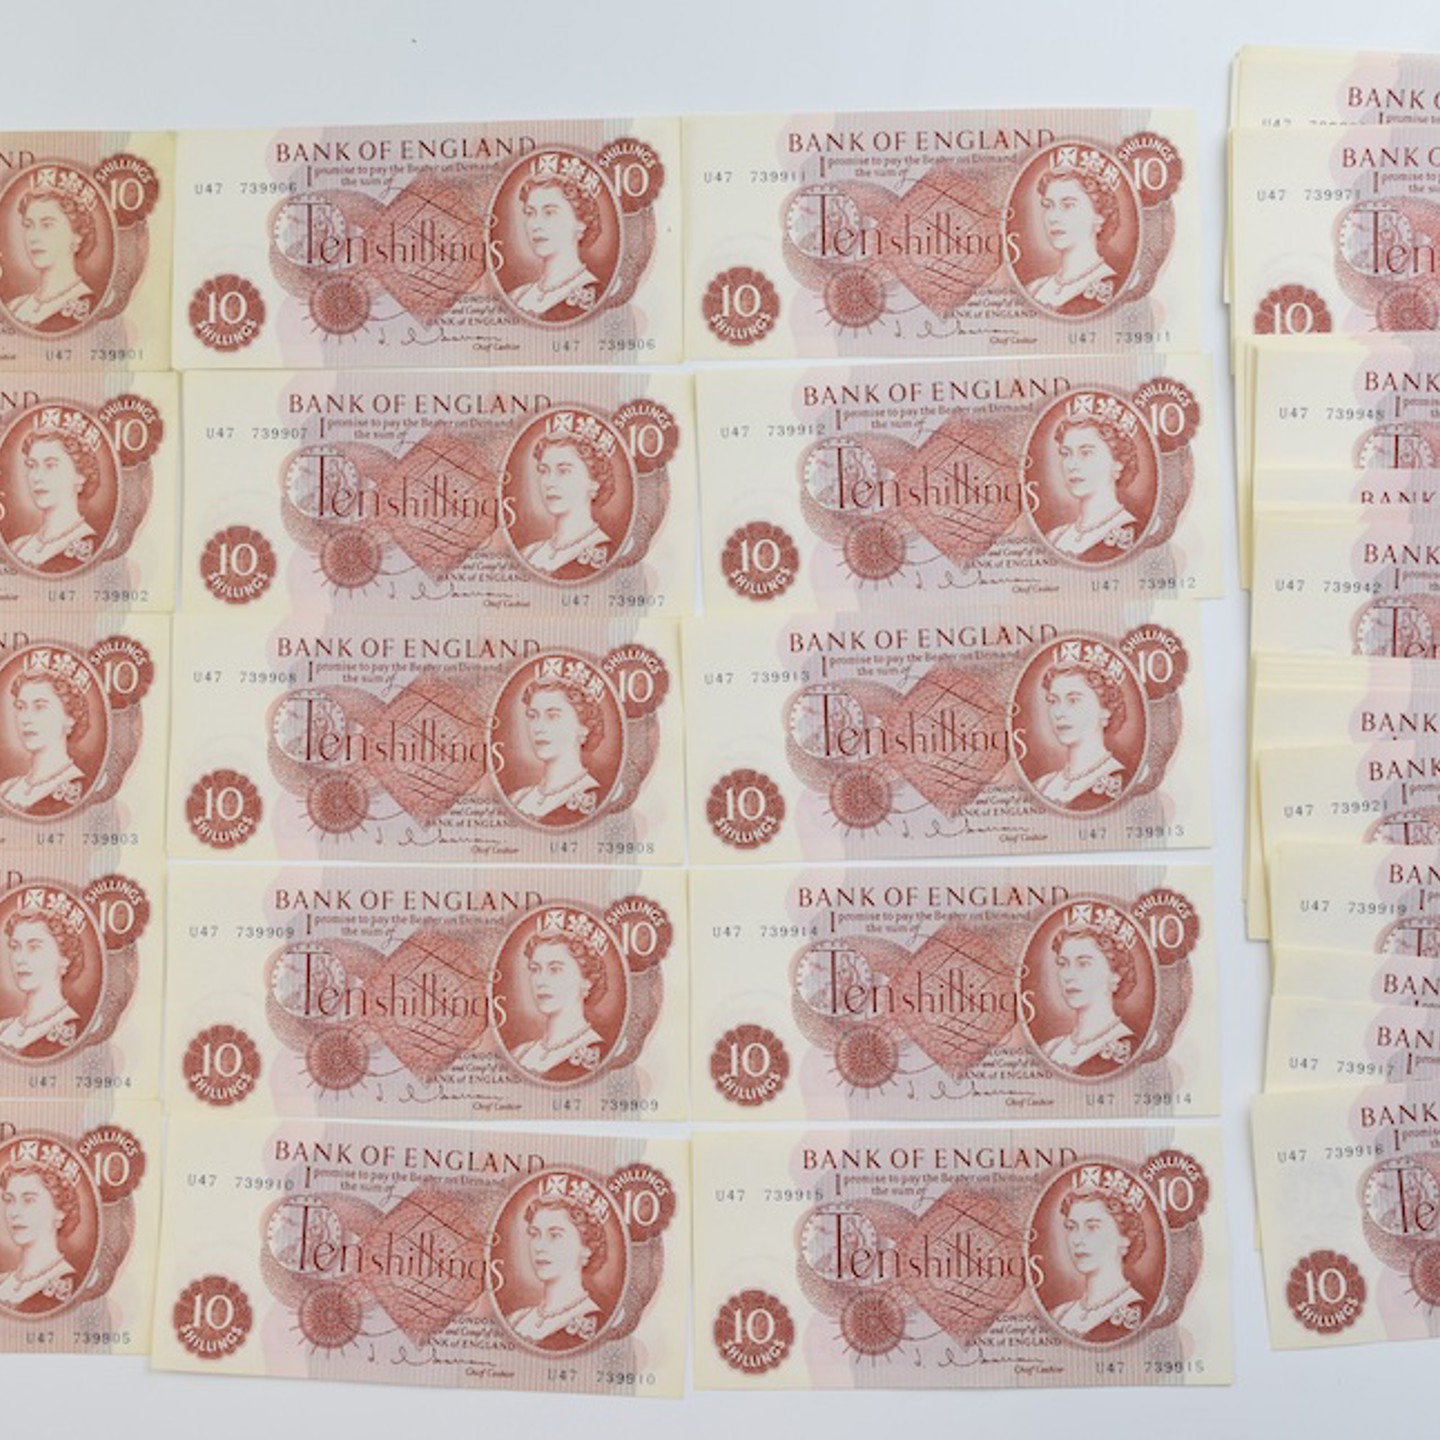 Ninety Six Bank Of England Near Consecutive 10 Shillings Banknotes, 1963 First Issue, Signed J.Q. Hollom, Prefix U47, Serial Number 739901 – 74000. Sold For £300